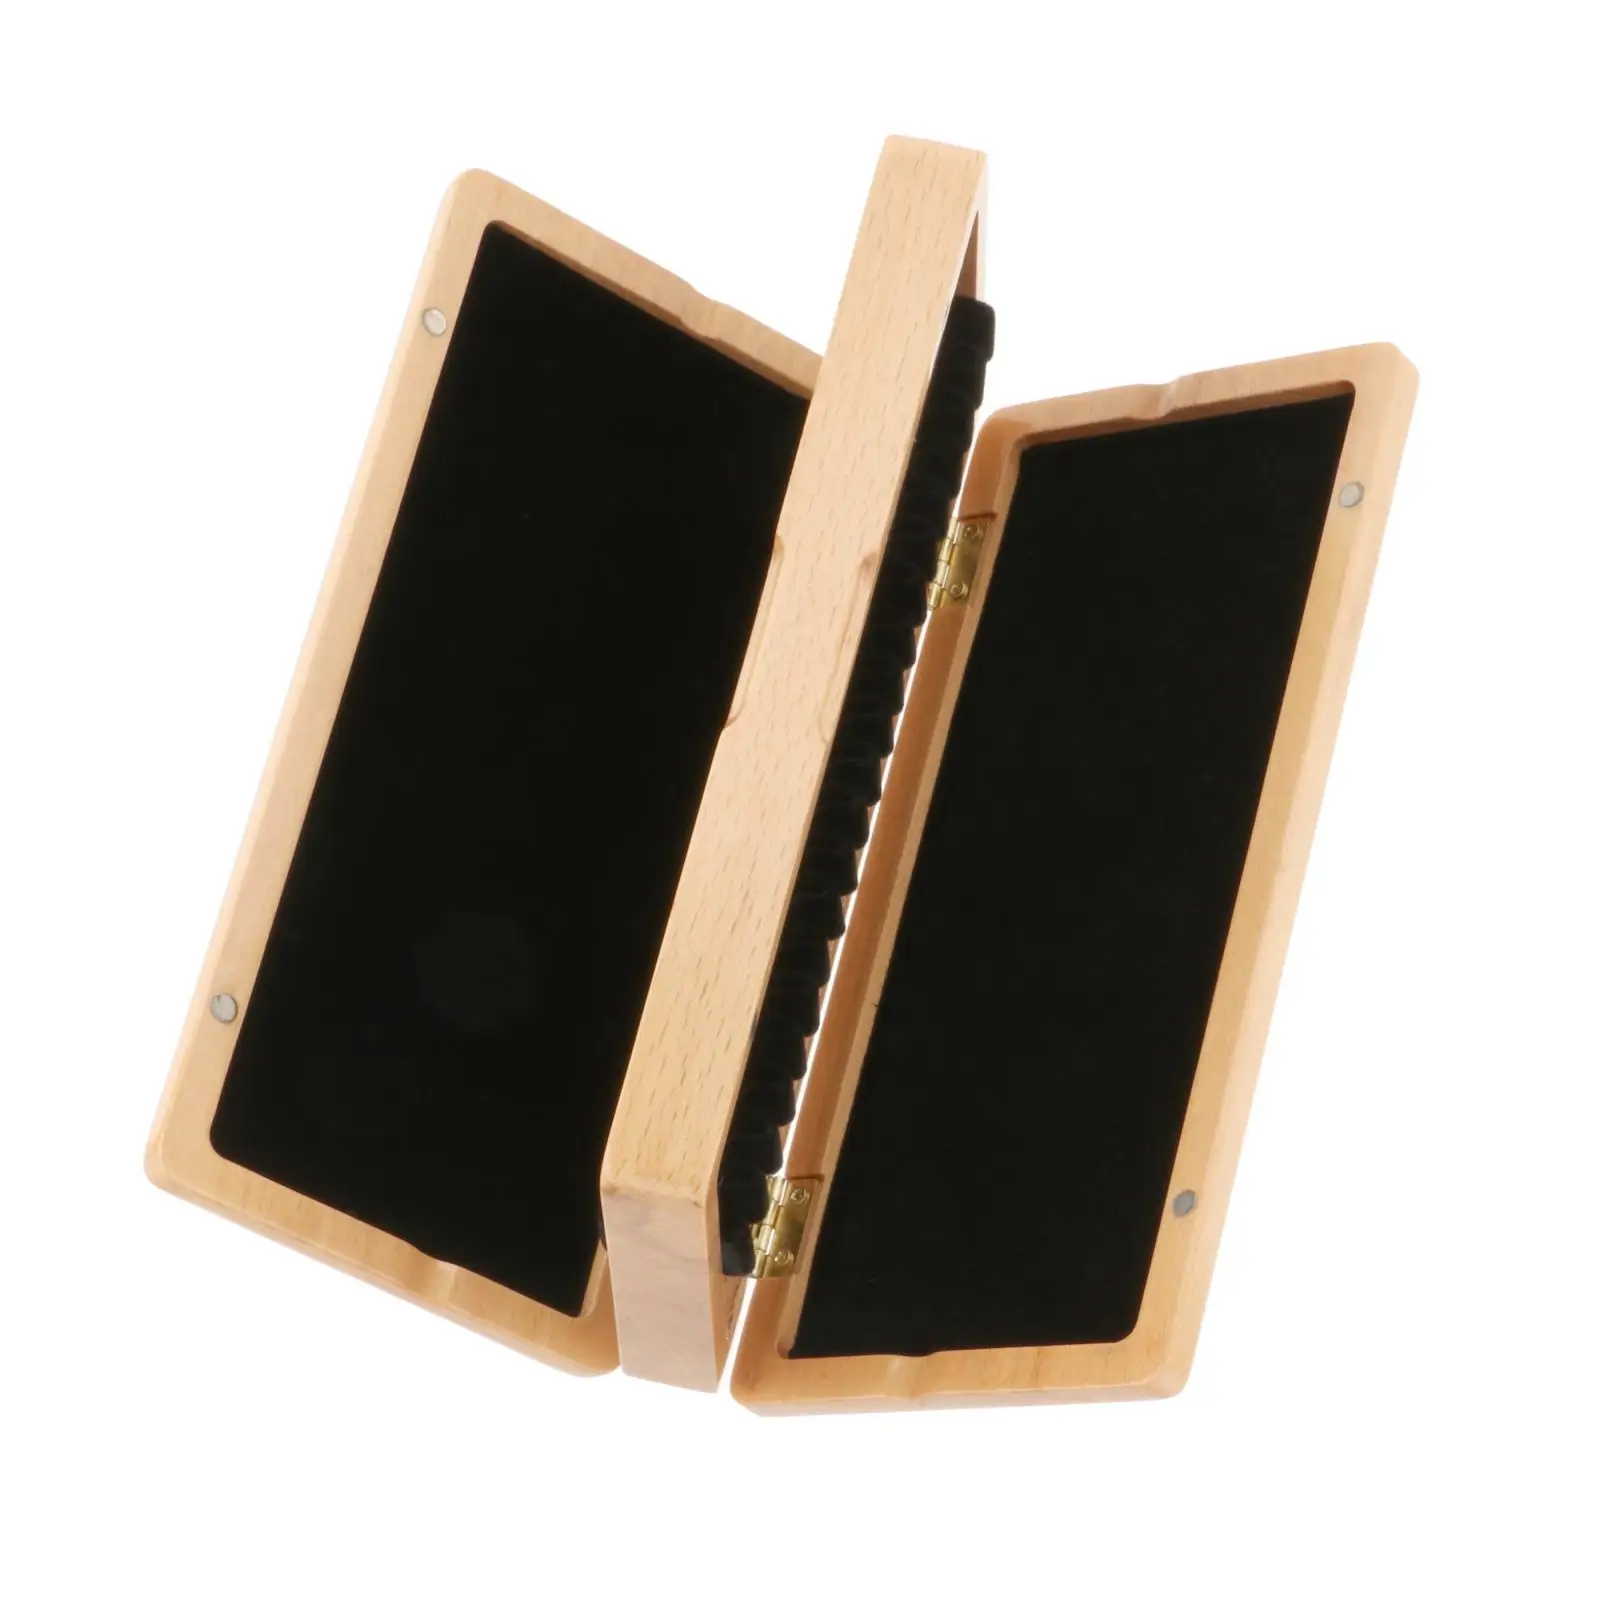 40 Reeds Case Box Holder Organizer With Flannel Slot For Bassoon Oboe Reeds Hold